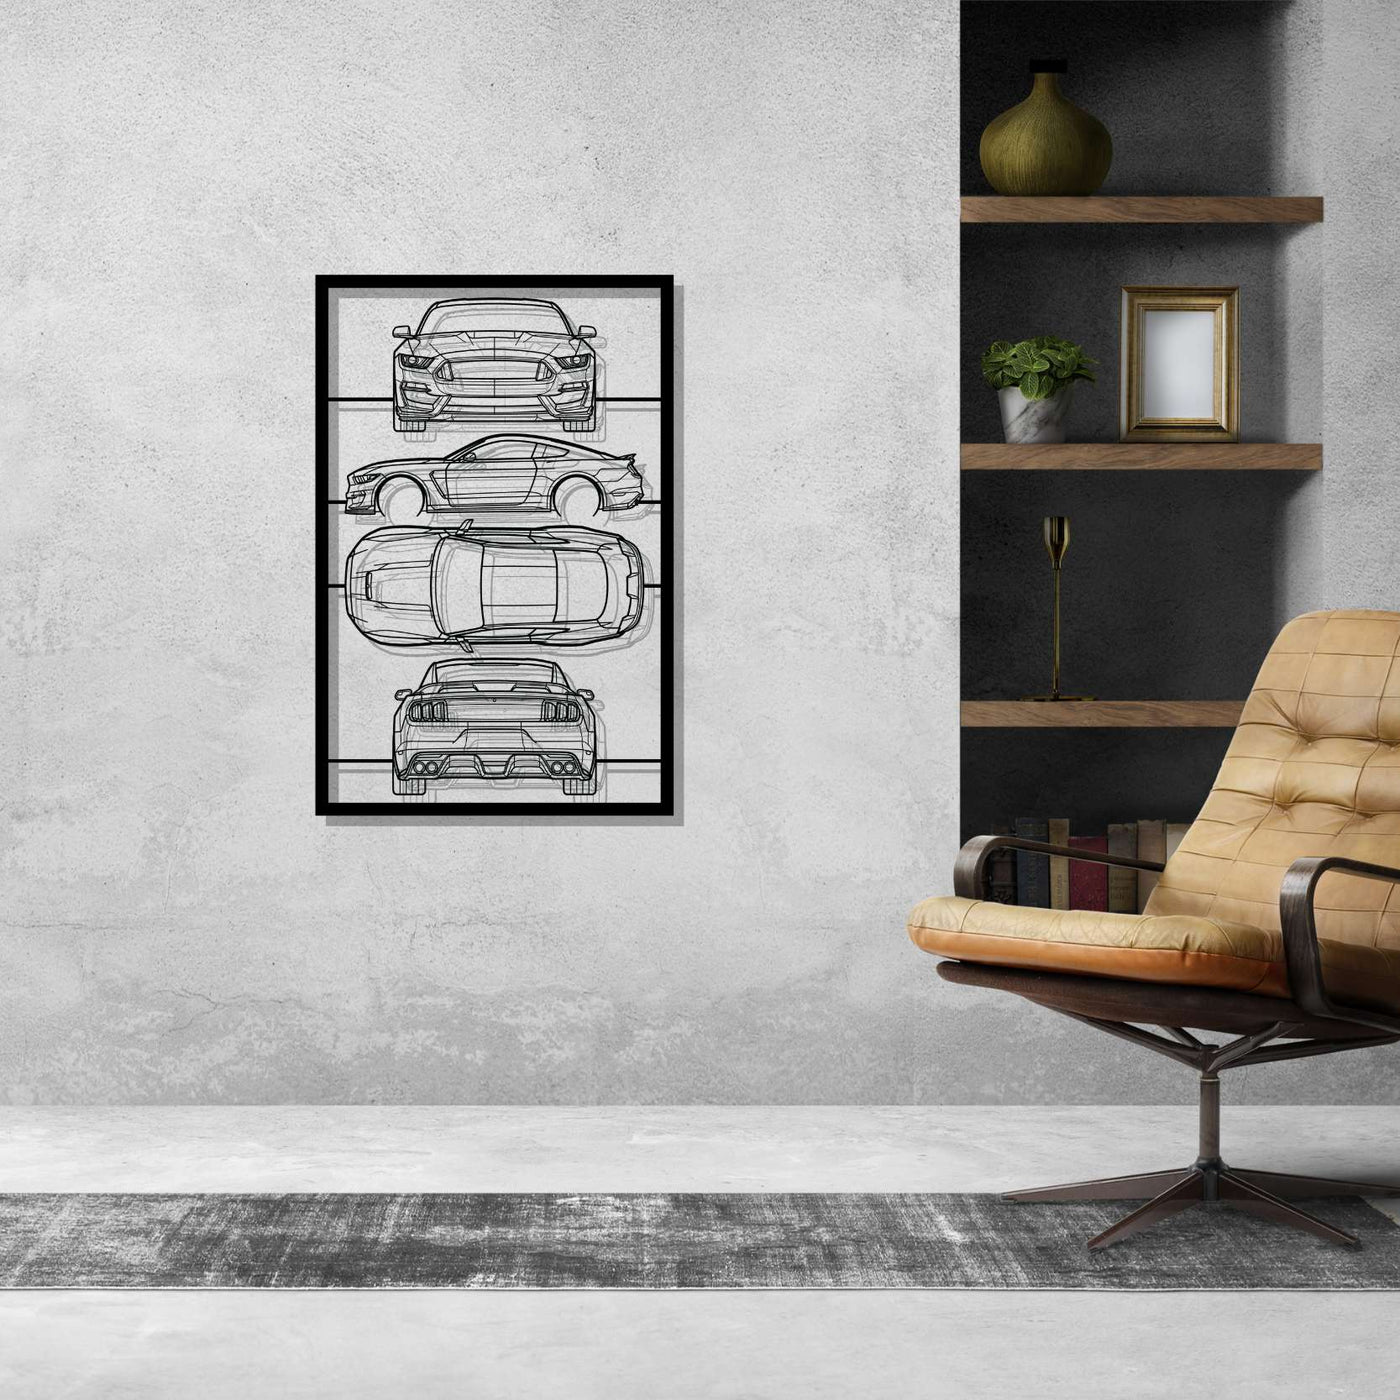 Mustang Shelby GT350 2019 Frame Silhouette Metal Wall Art